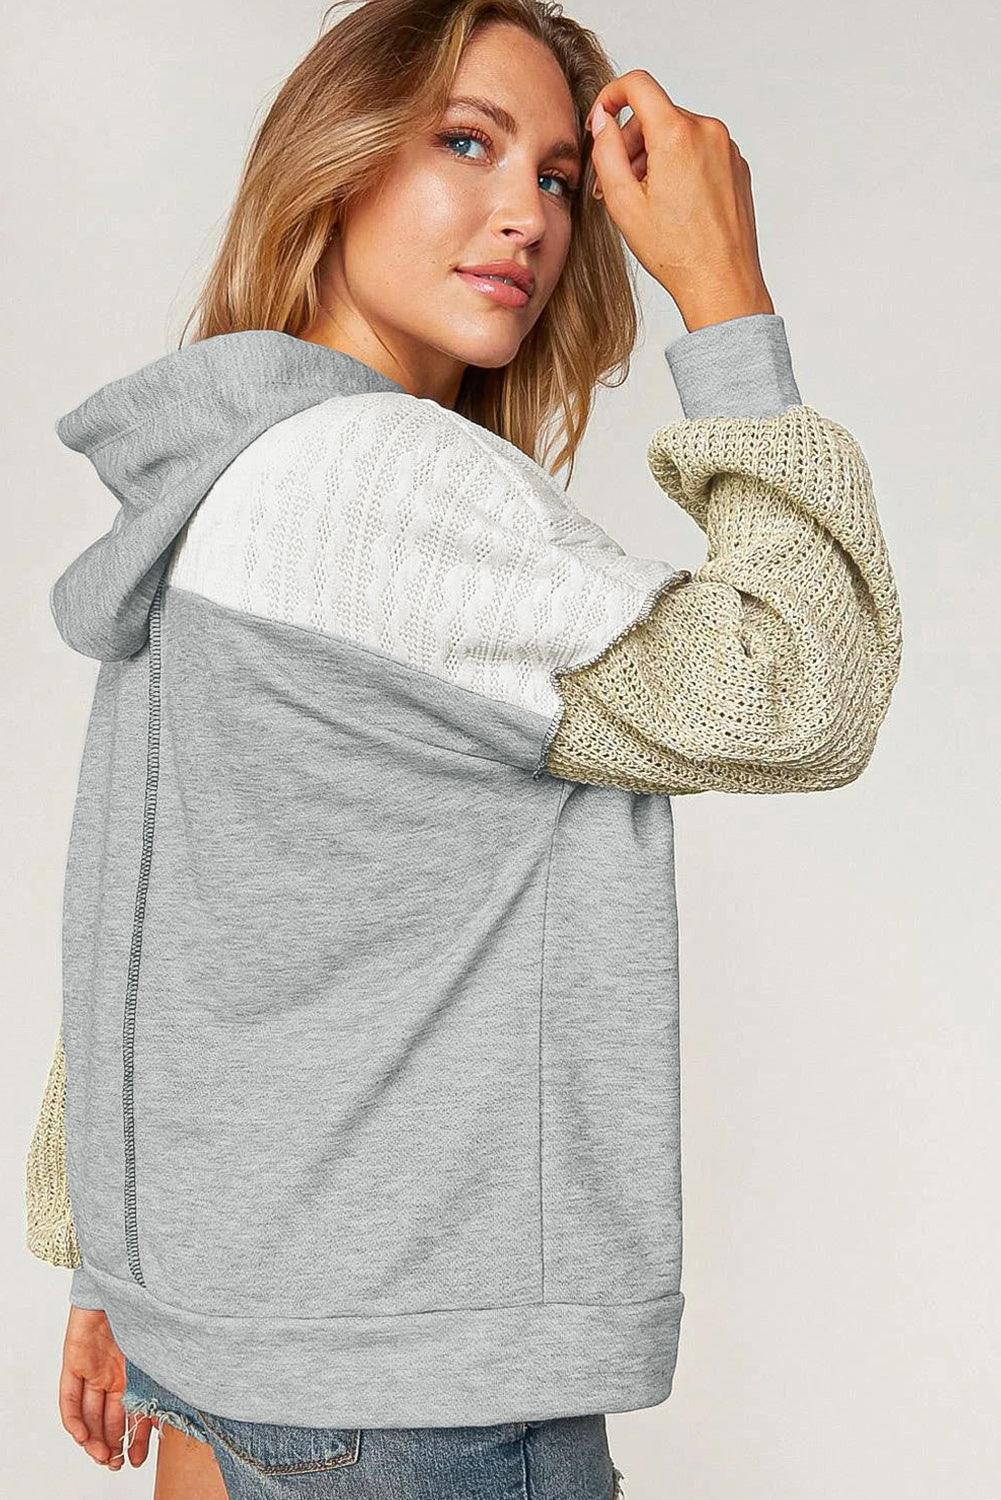 Gray Colorblock Patchwork Pullover Hoodie - L & M Kee, LLC